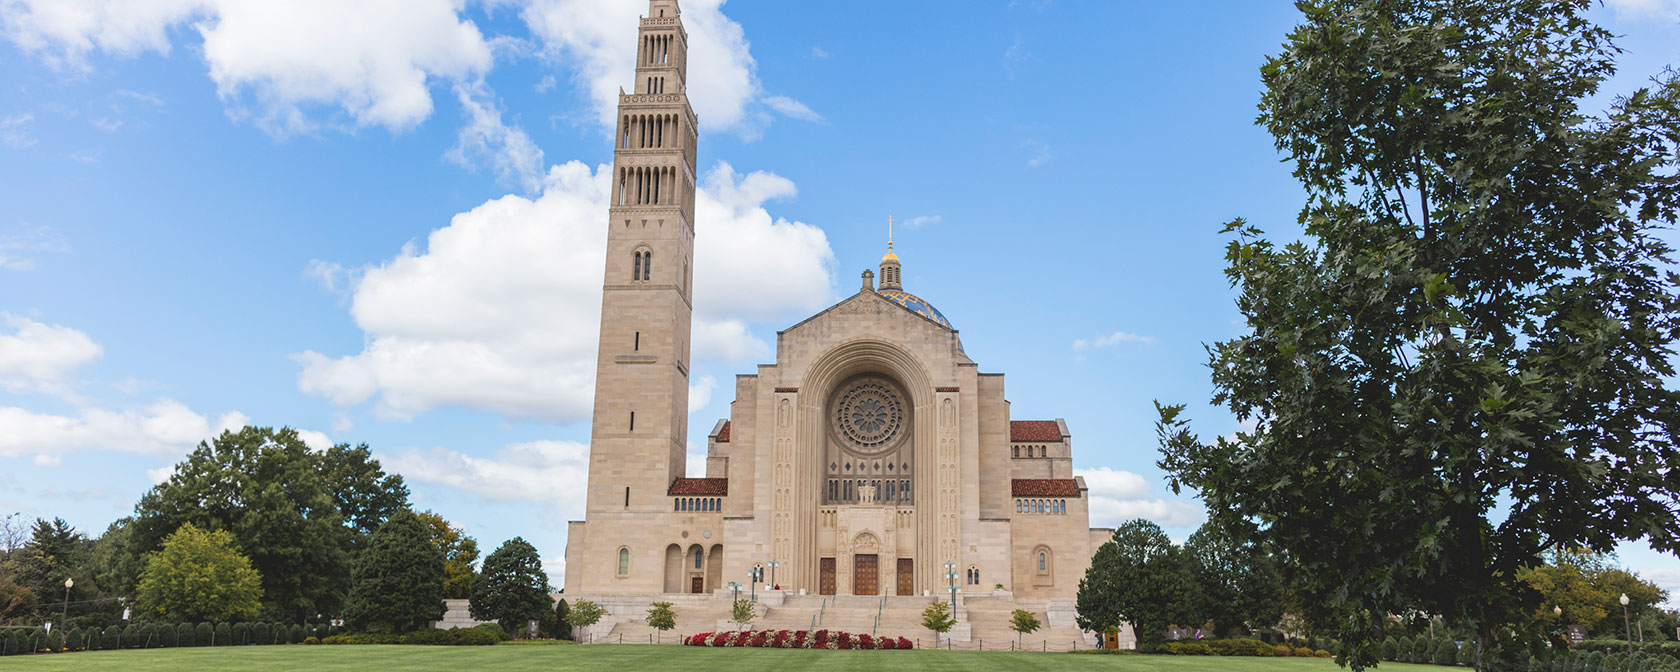 Basilica of National Shrine of the Immaculate Conception